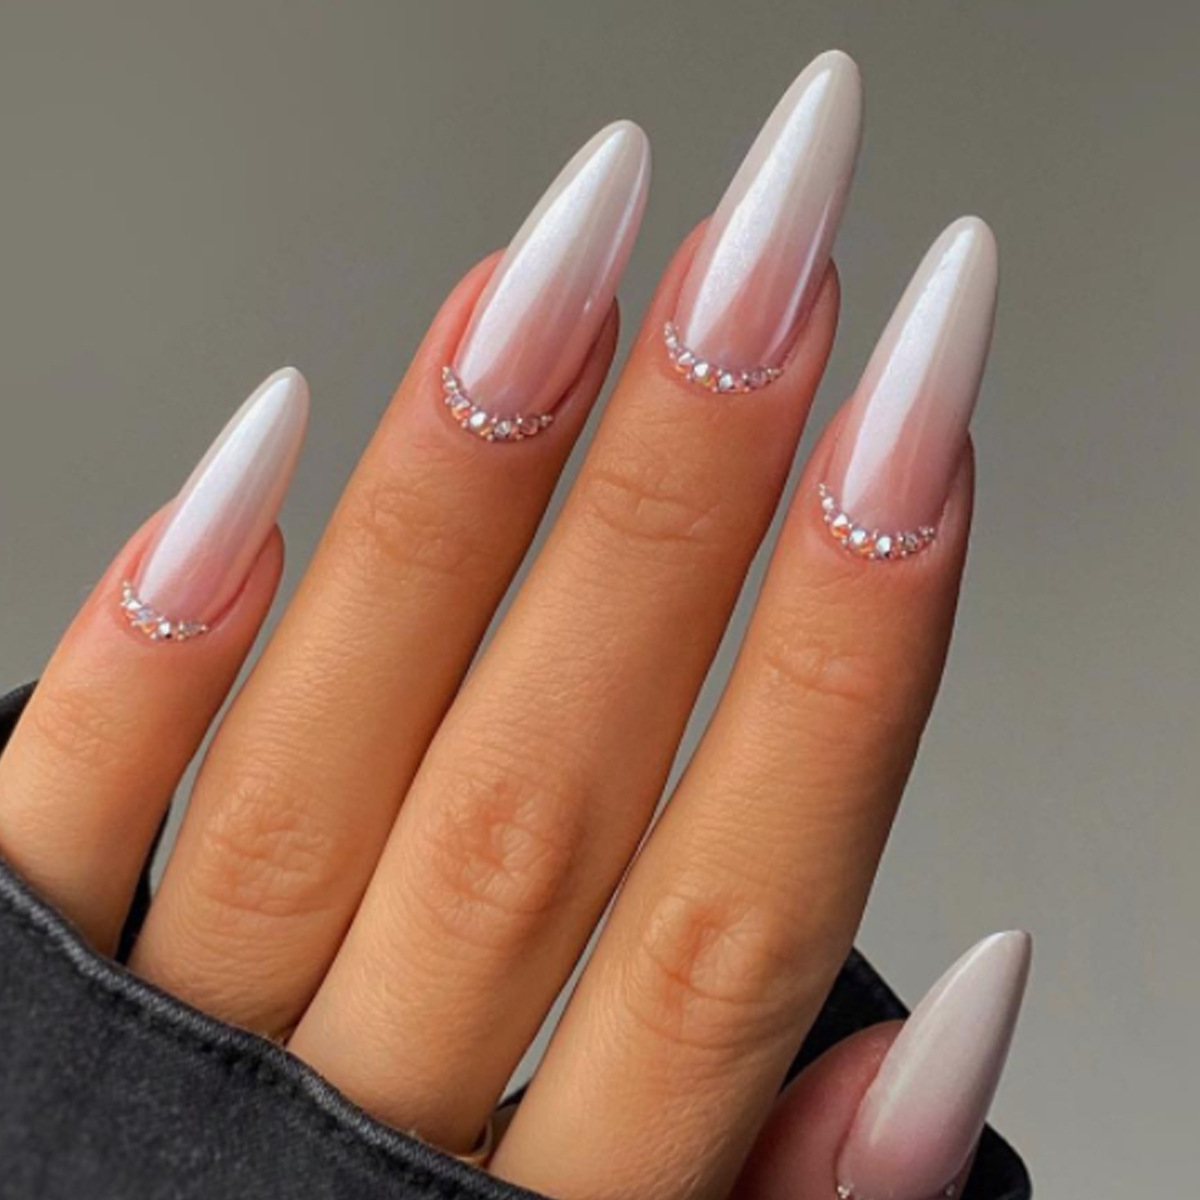 The Special Glue That Keeps False Nails Intact